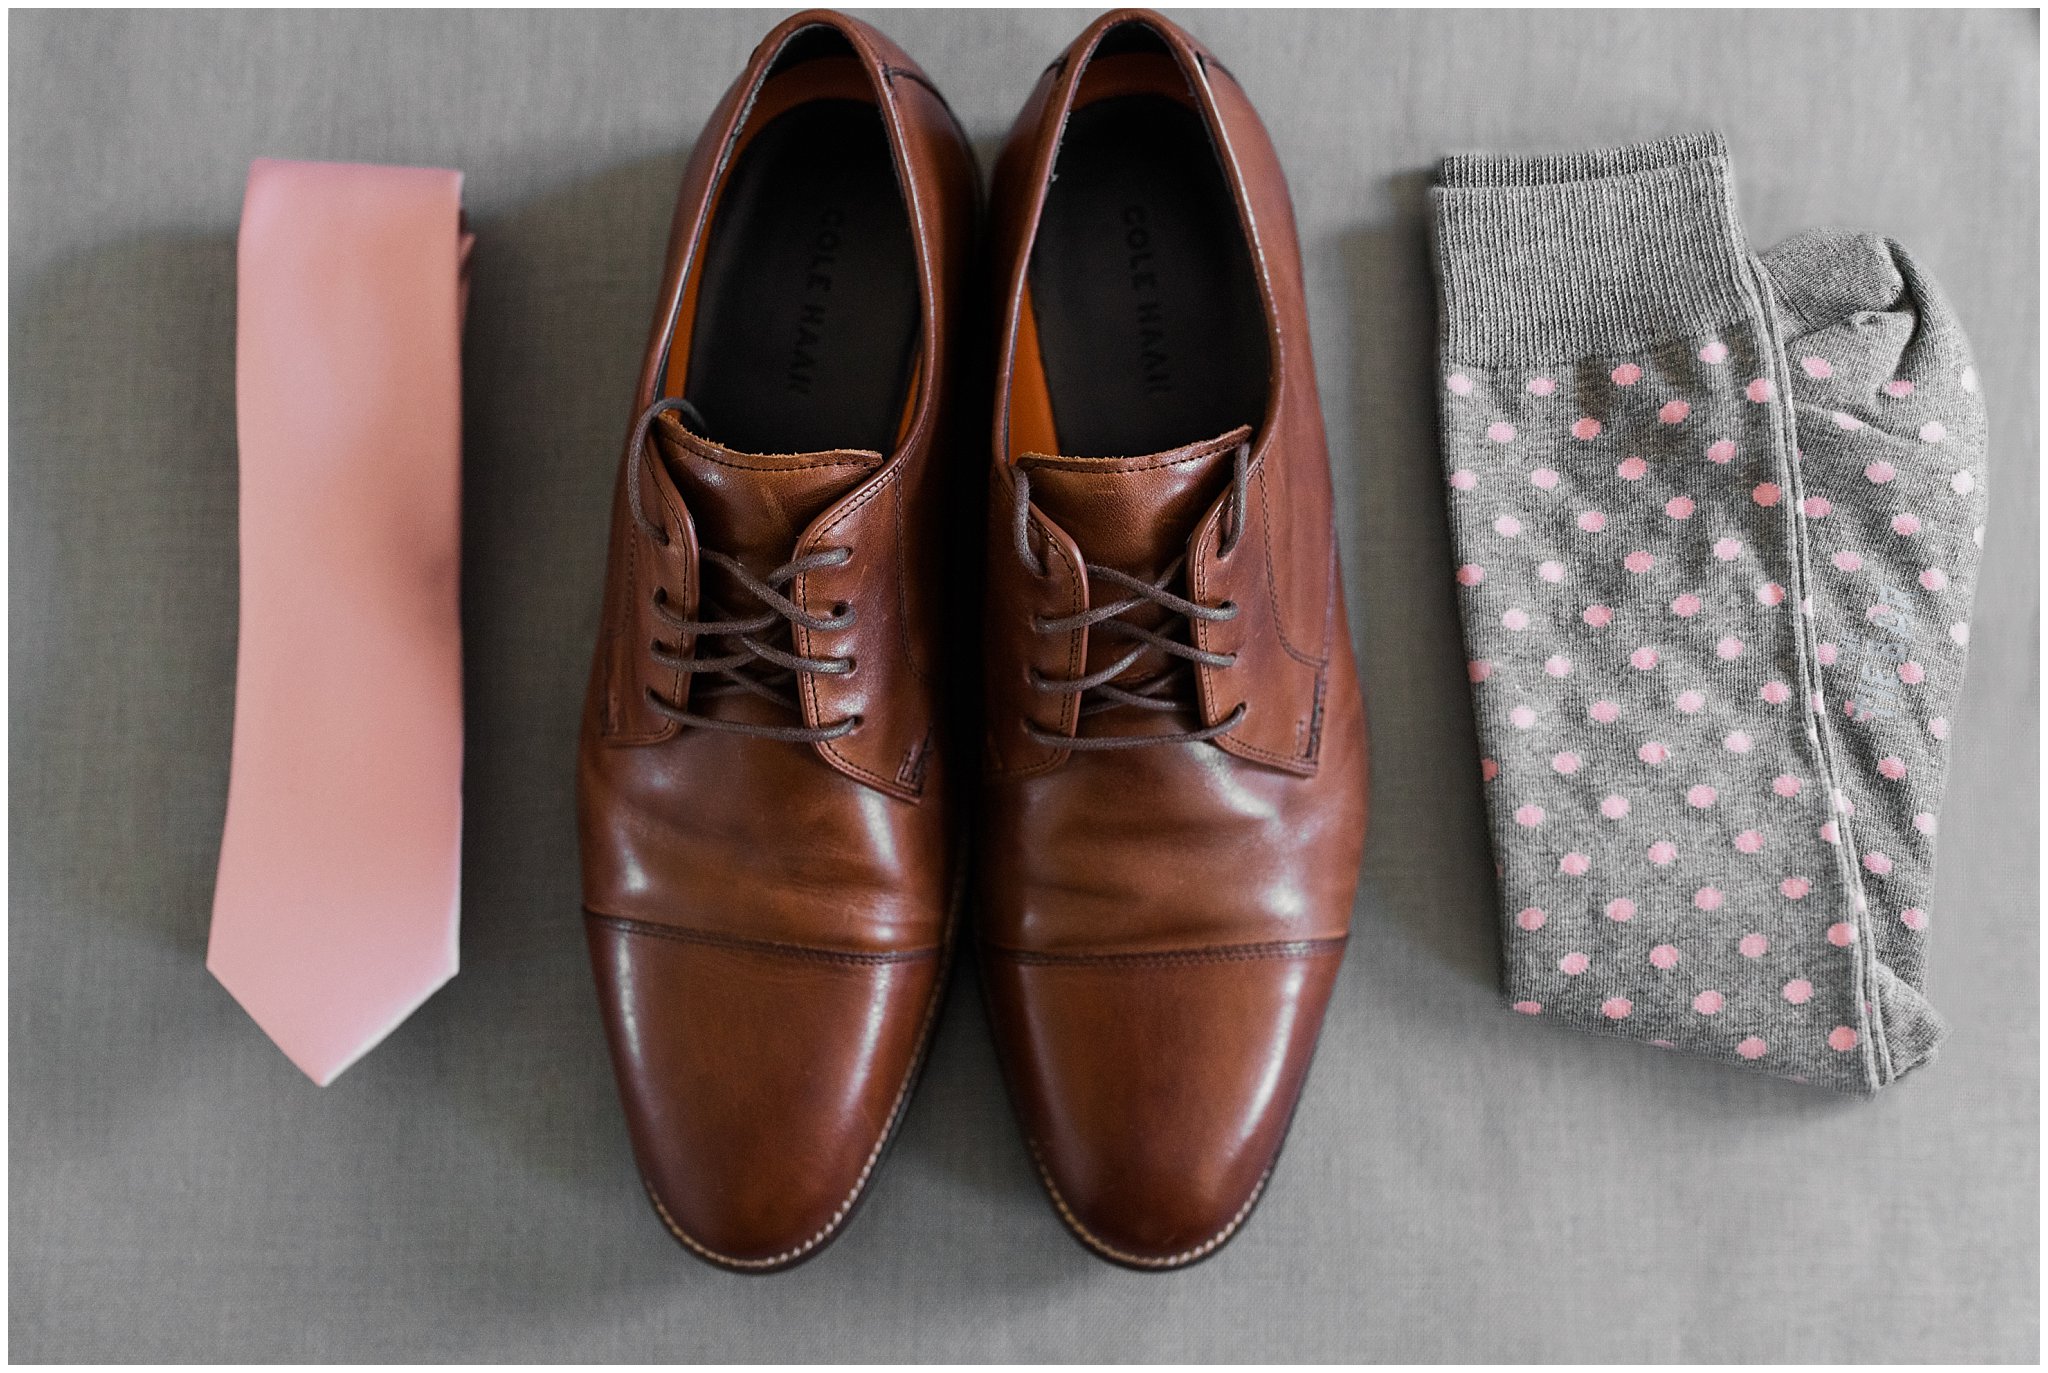 Groom details with brown leather Cole Haan shoes, blush tie and grey suit | Oak Hills Utah Dusty Rose and Gray Summer Wedding | Jessie and Dallin Photography